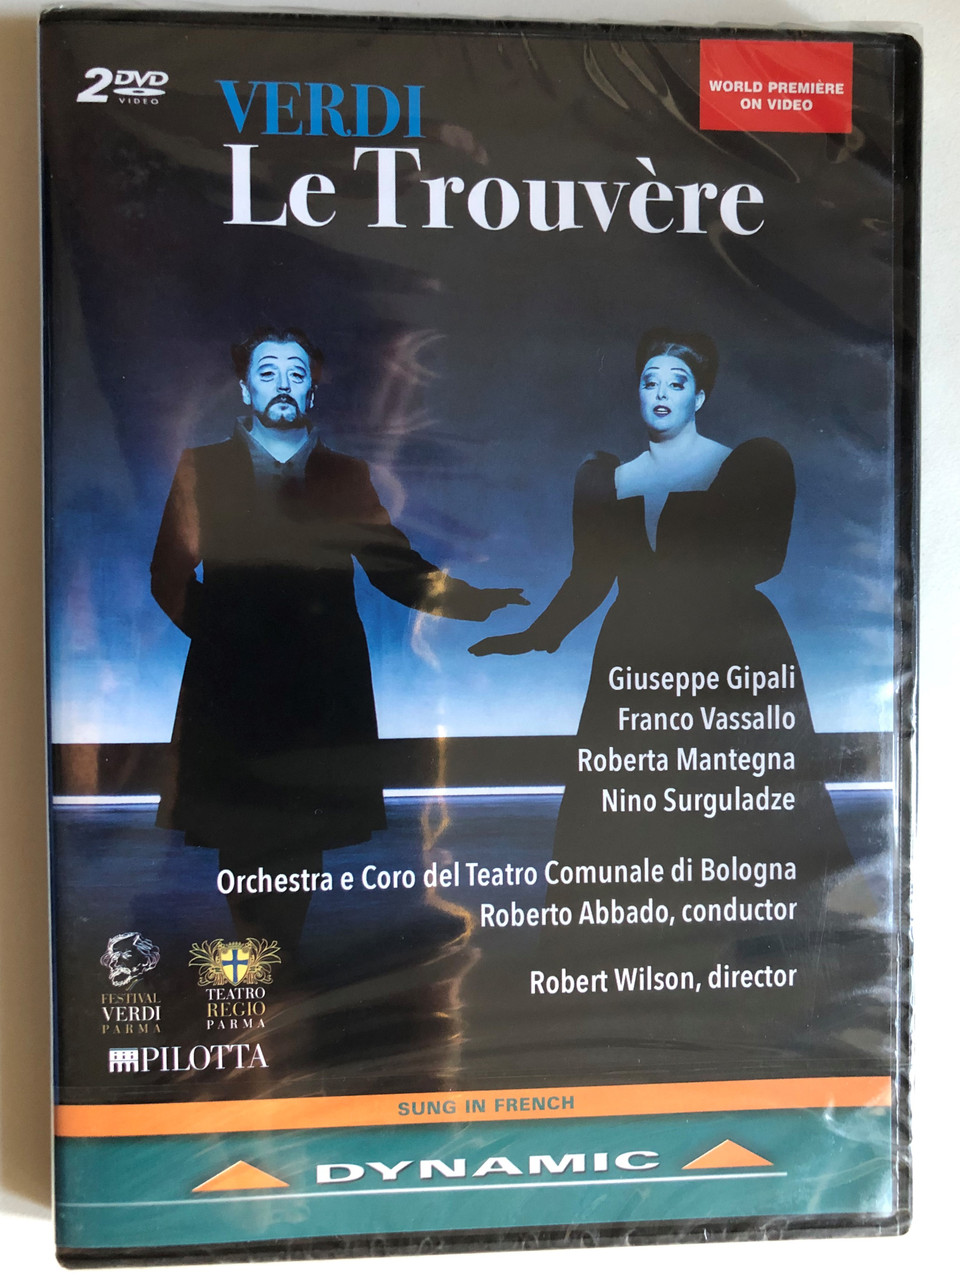 Verdi_Trouvere_2_DVD_Set_Opera_in_four_acts_-_Libretto_by_Salvadore_Cammarano_French_translation_by_milien_Pacini_Orchestra_and_Chorus_of_the_Teatro_Comunale_of_Bologna_Condu___49979.1691476428.1280.1280.JPG (960×1280)